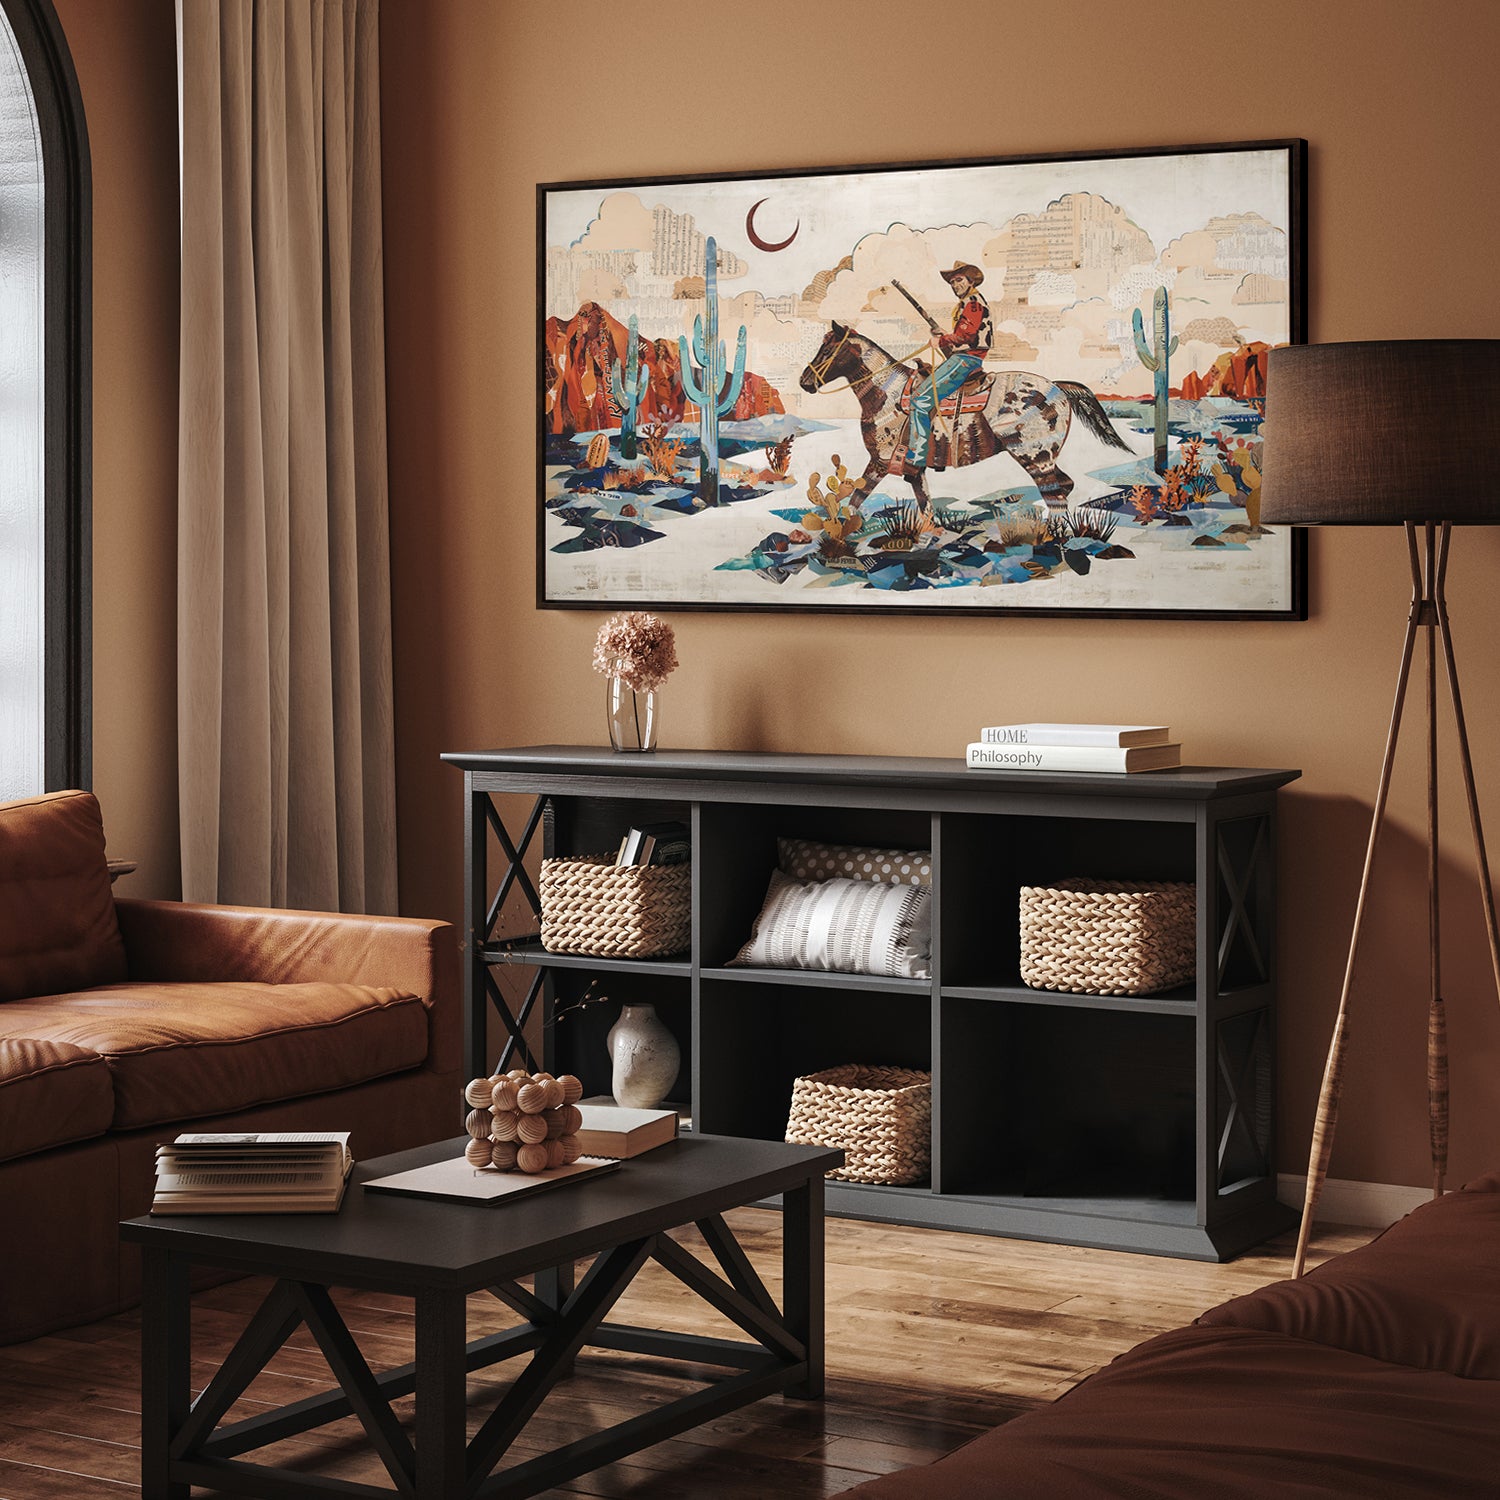 Dolan Geiman modern cowboy in desert canvas print entitled Night Scout shown in living room with brown and beige hues.